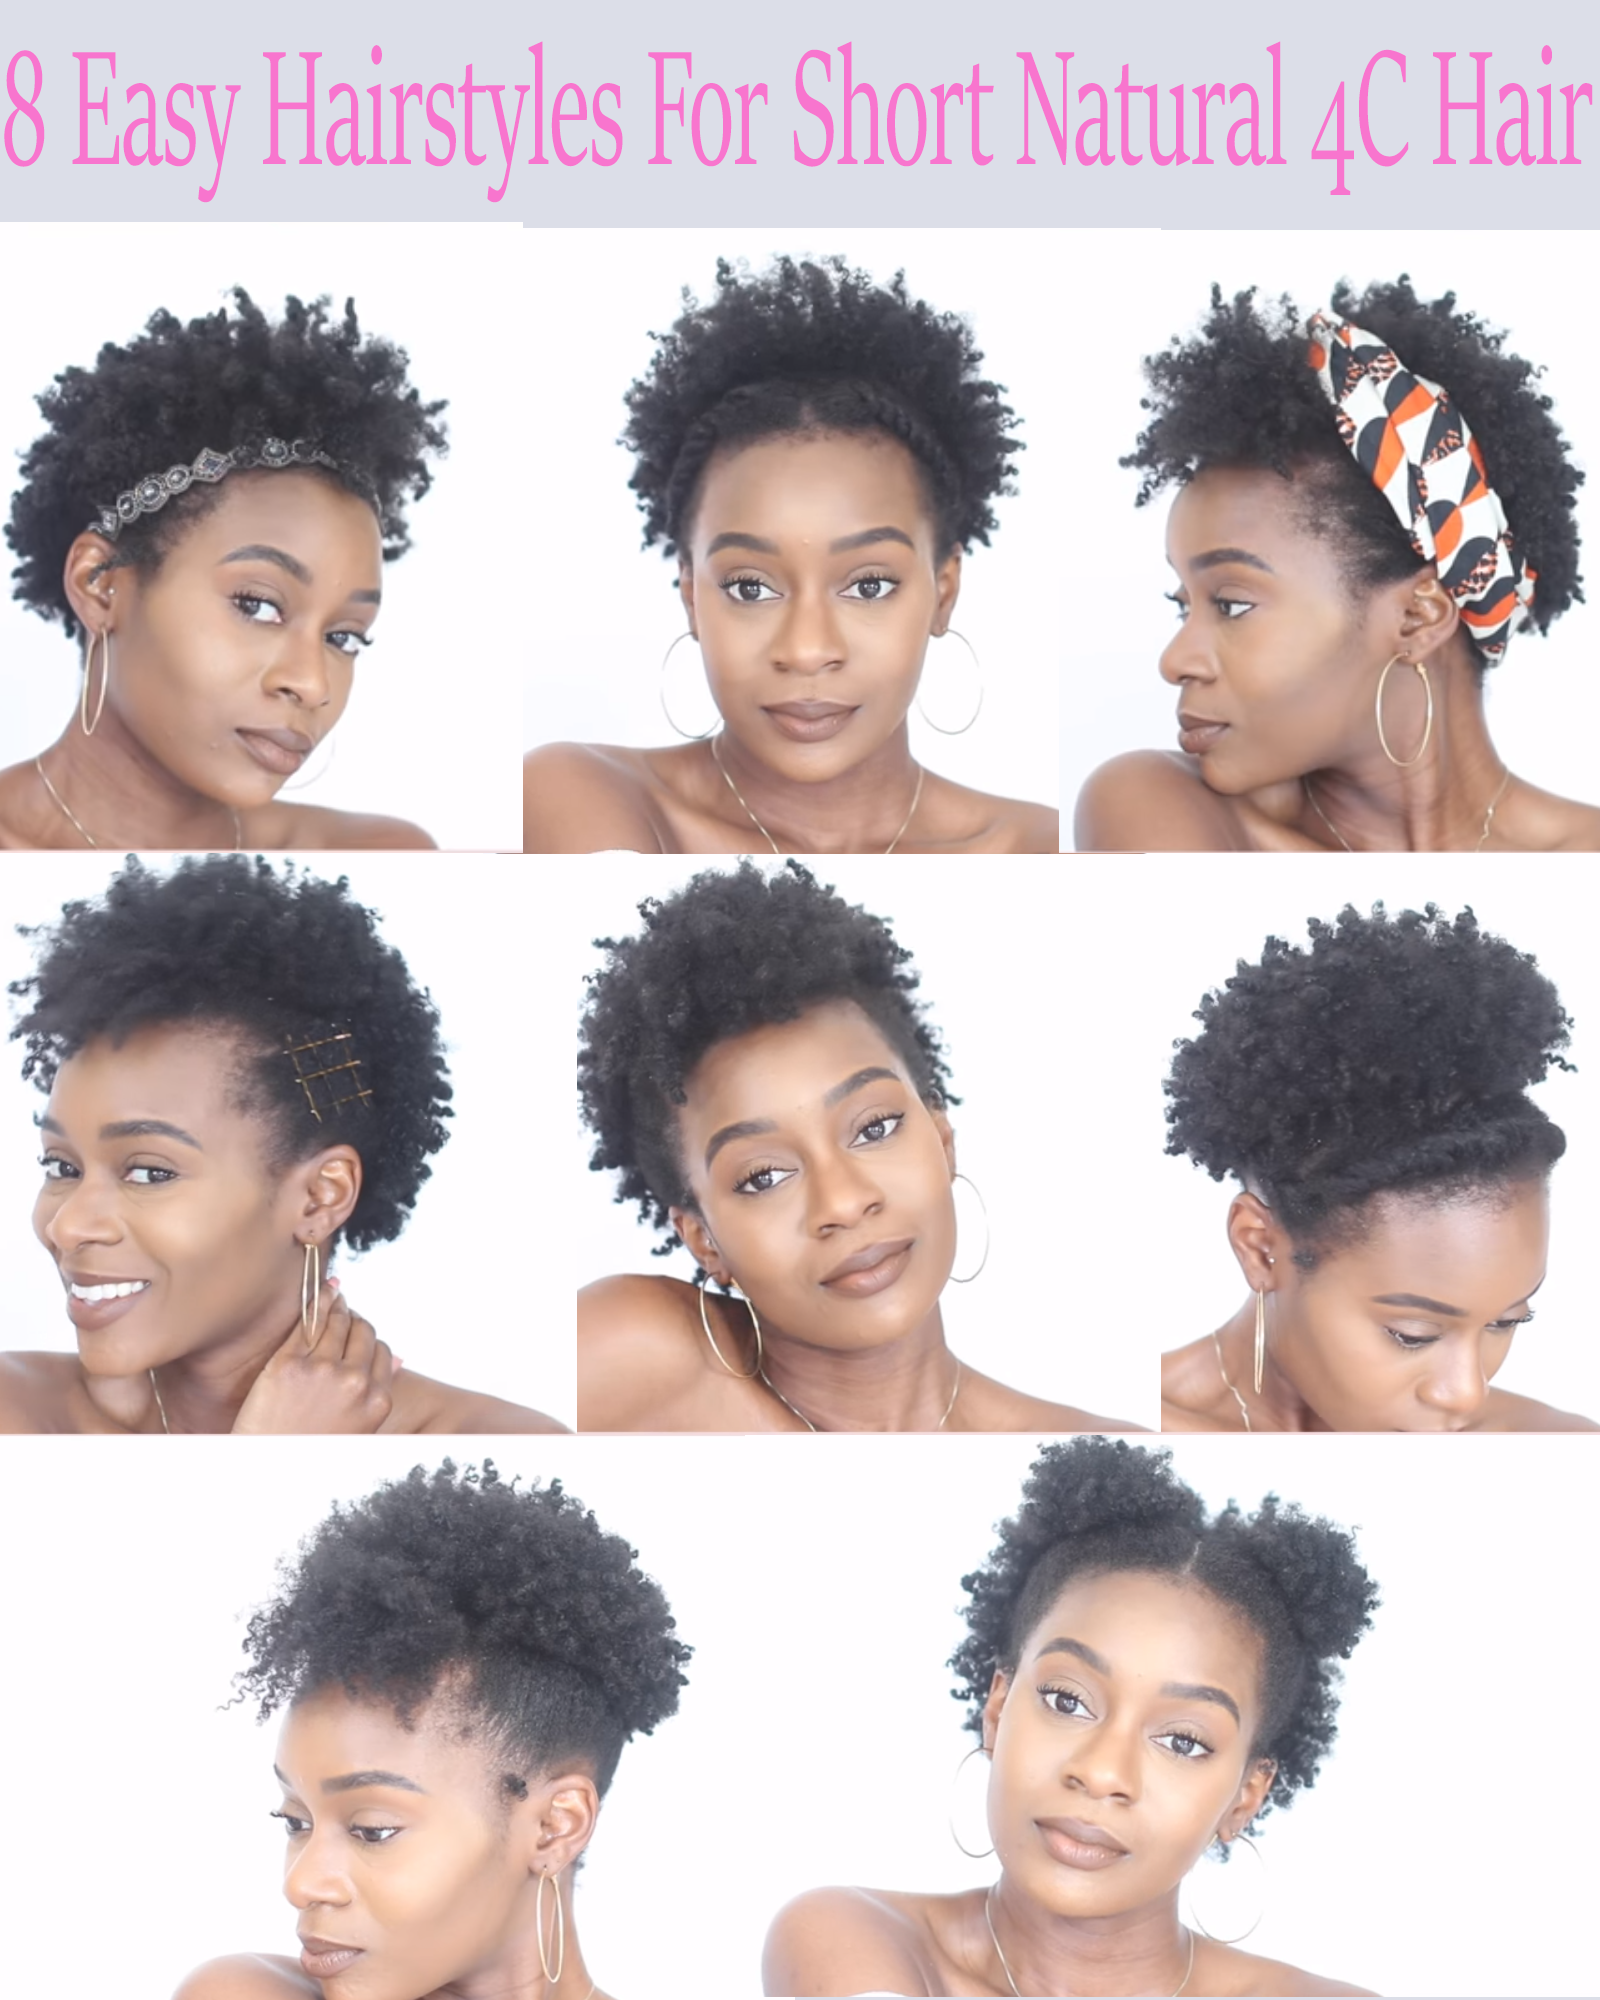 8 Easy Protective Hairstyles For Short Natural 4C Hair That Will Not